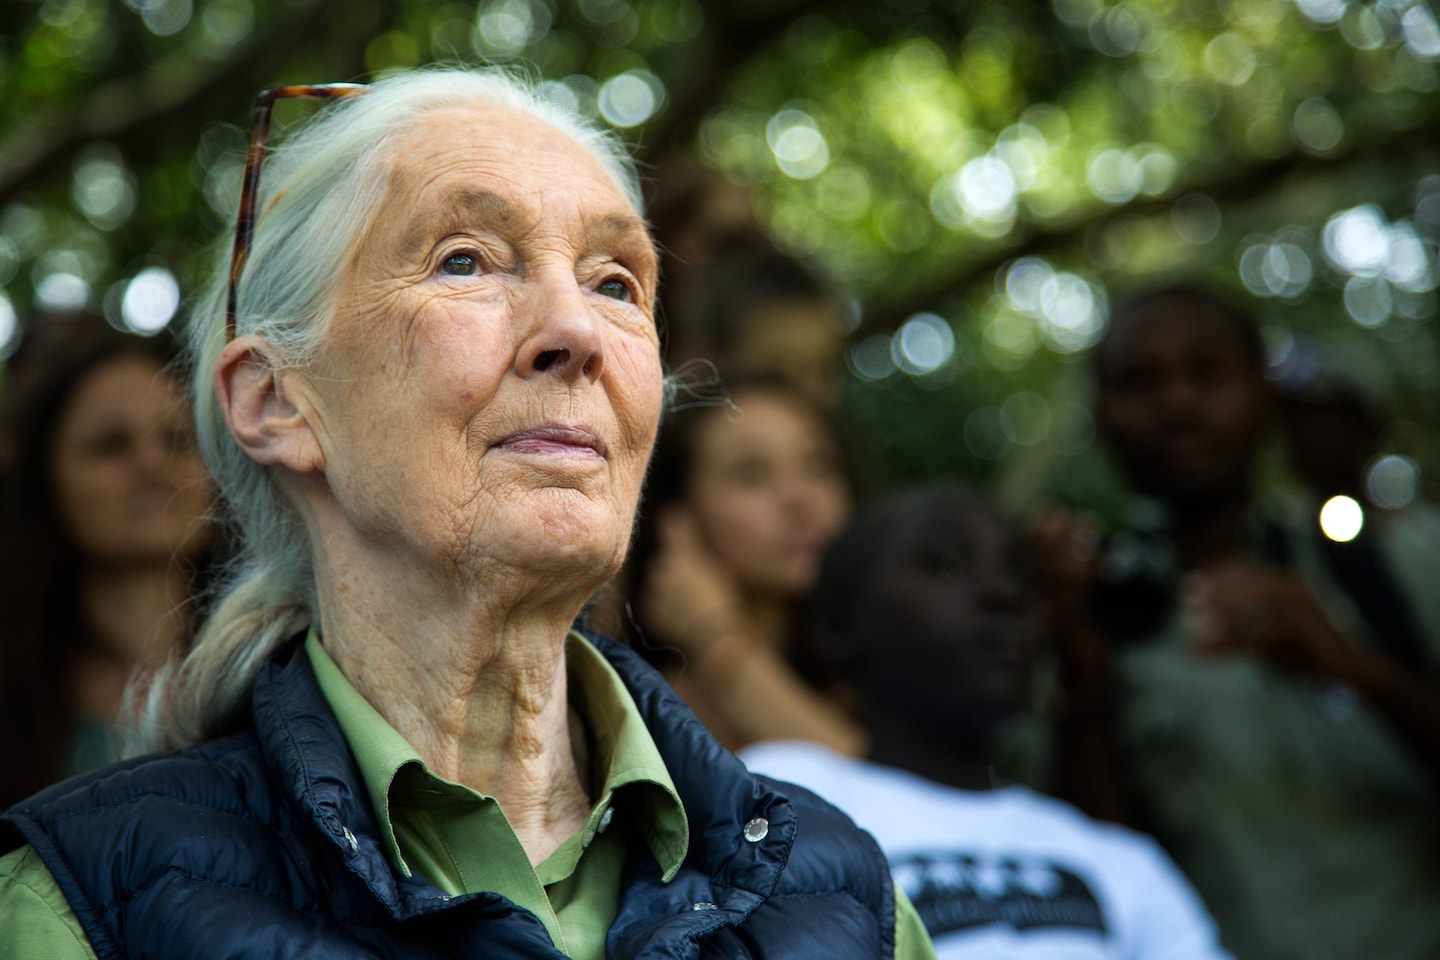 In conversation with Jane Goodall on climate change — and remaining hopeful for the future